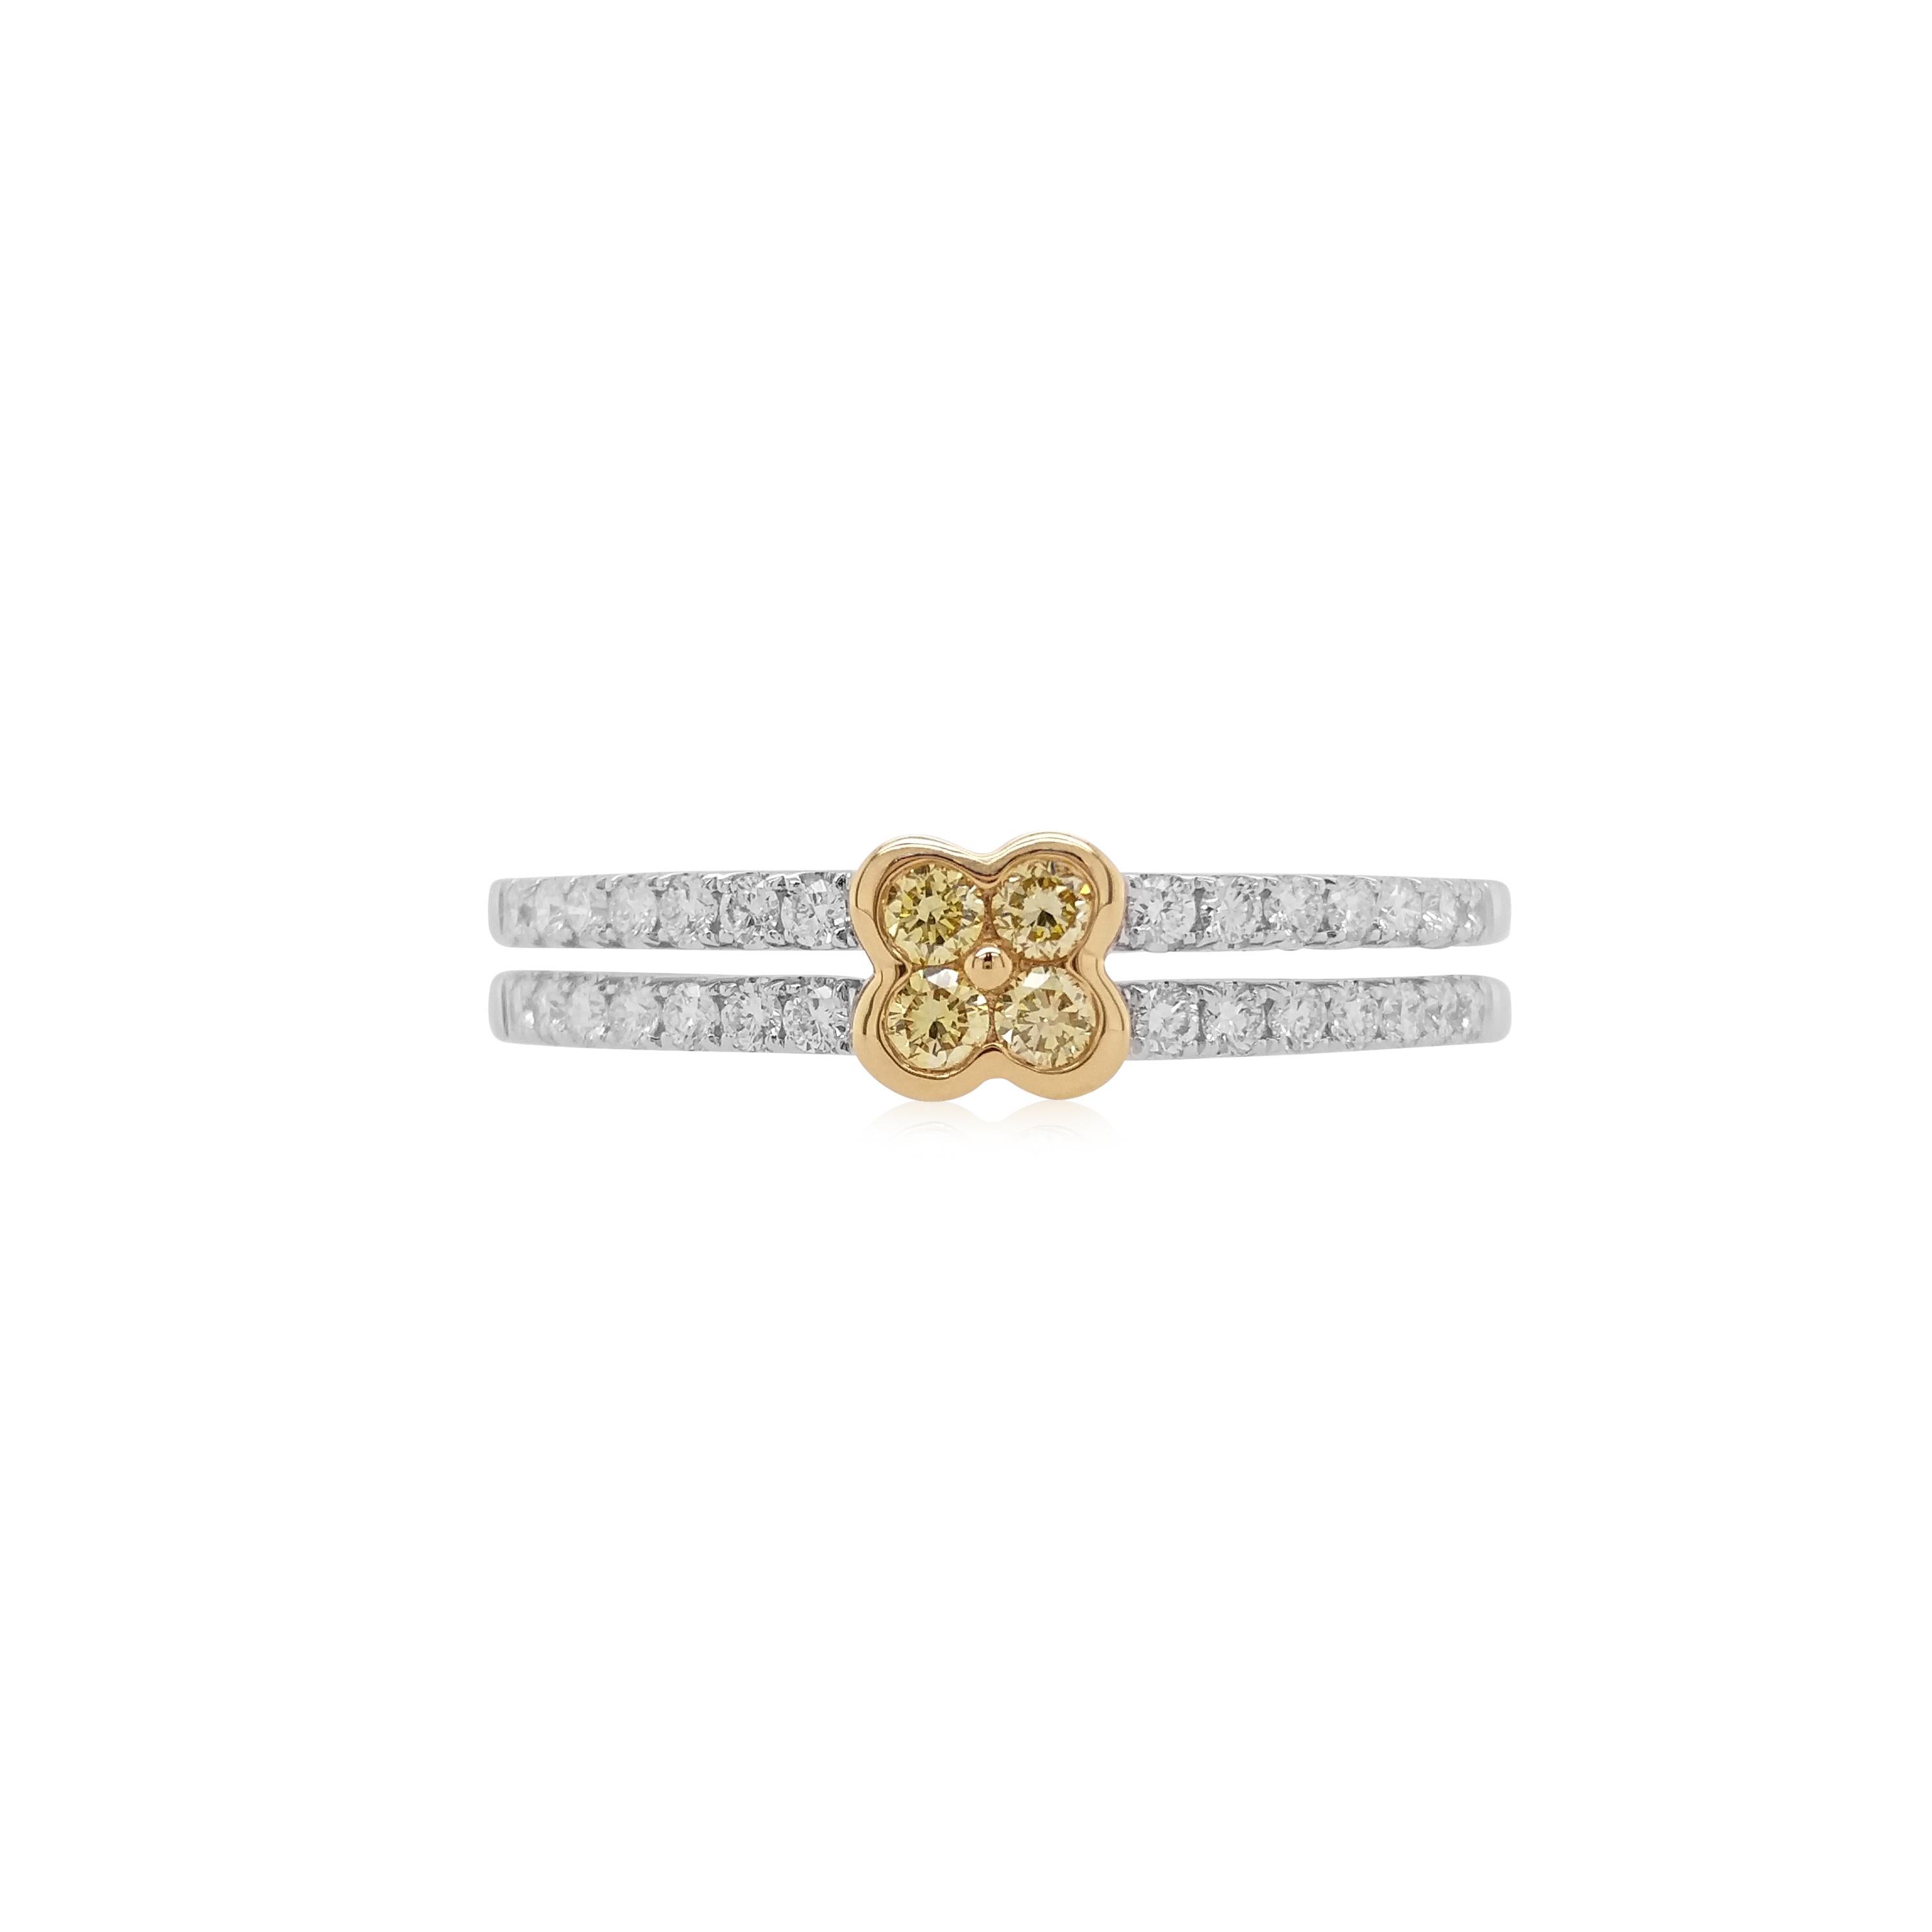 An elegant ring with round brilliant cut Yellow diamonds set in an 18K gold double band with white diamonds, creating a statement piece. 

Yellow Diamonds- 0.10 cts
White Diamond- 0.20 cts

HYT Jewelry is a privately owned company headquartered in